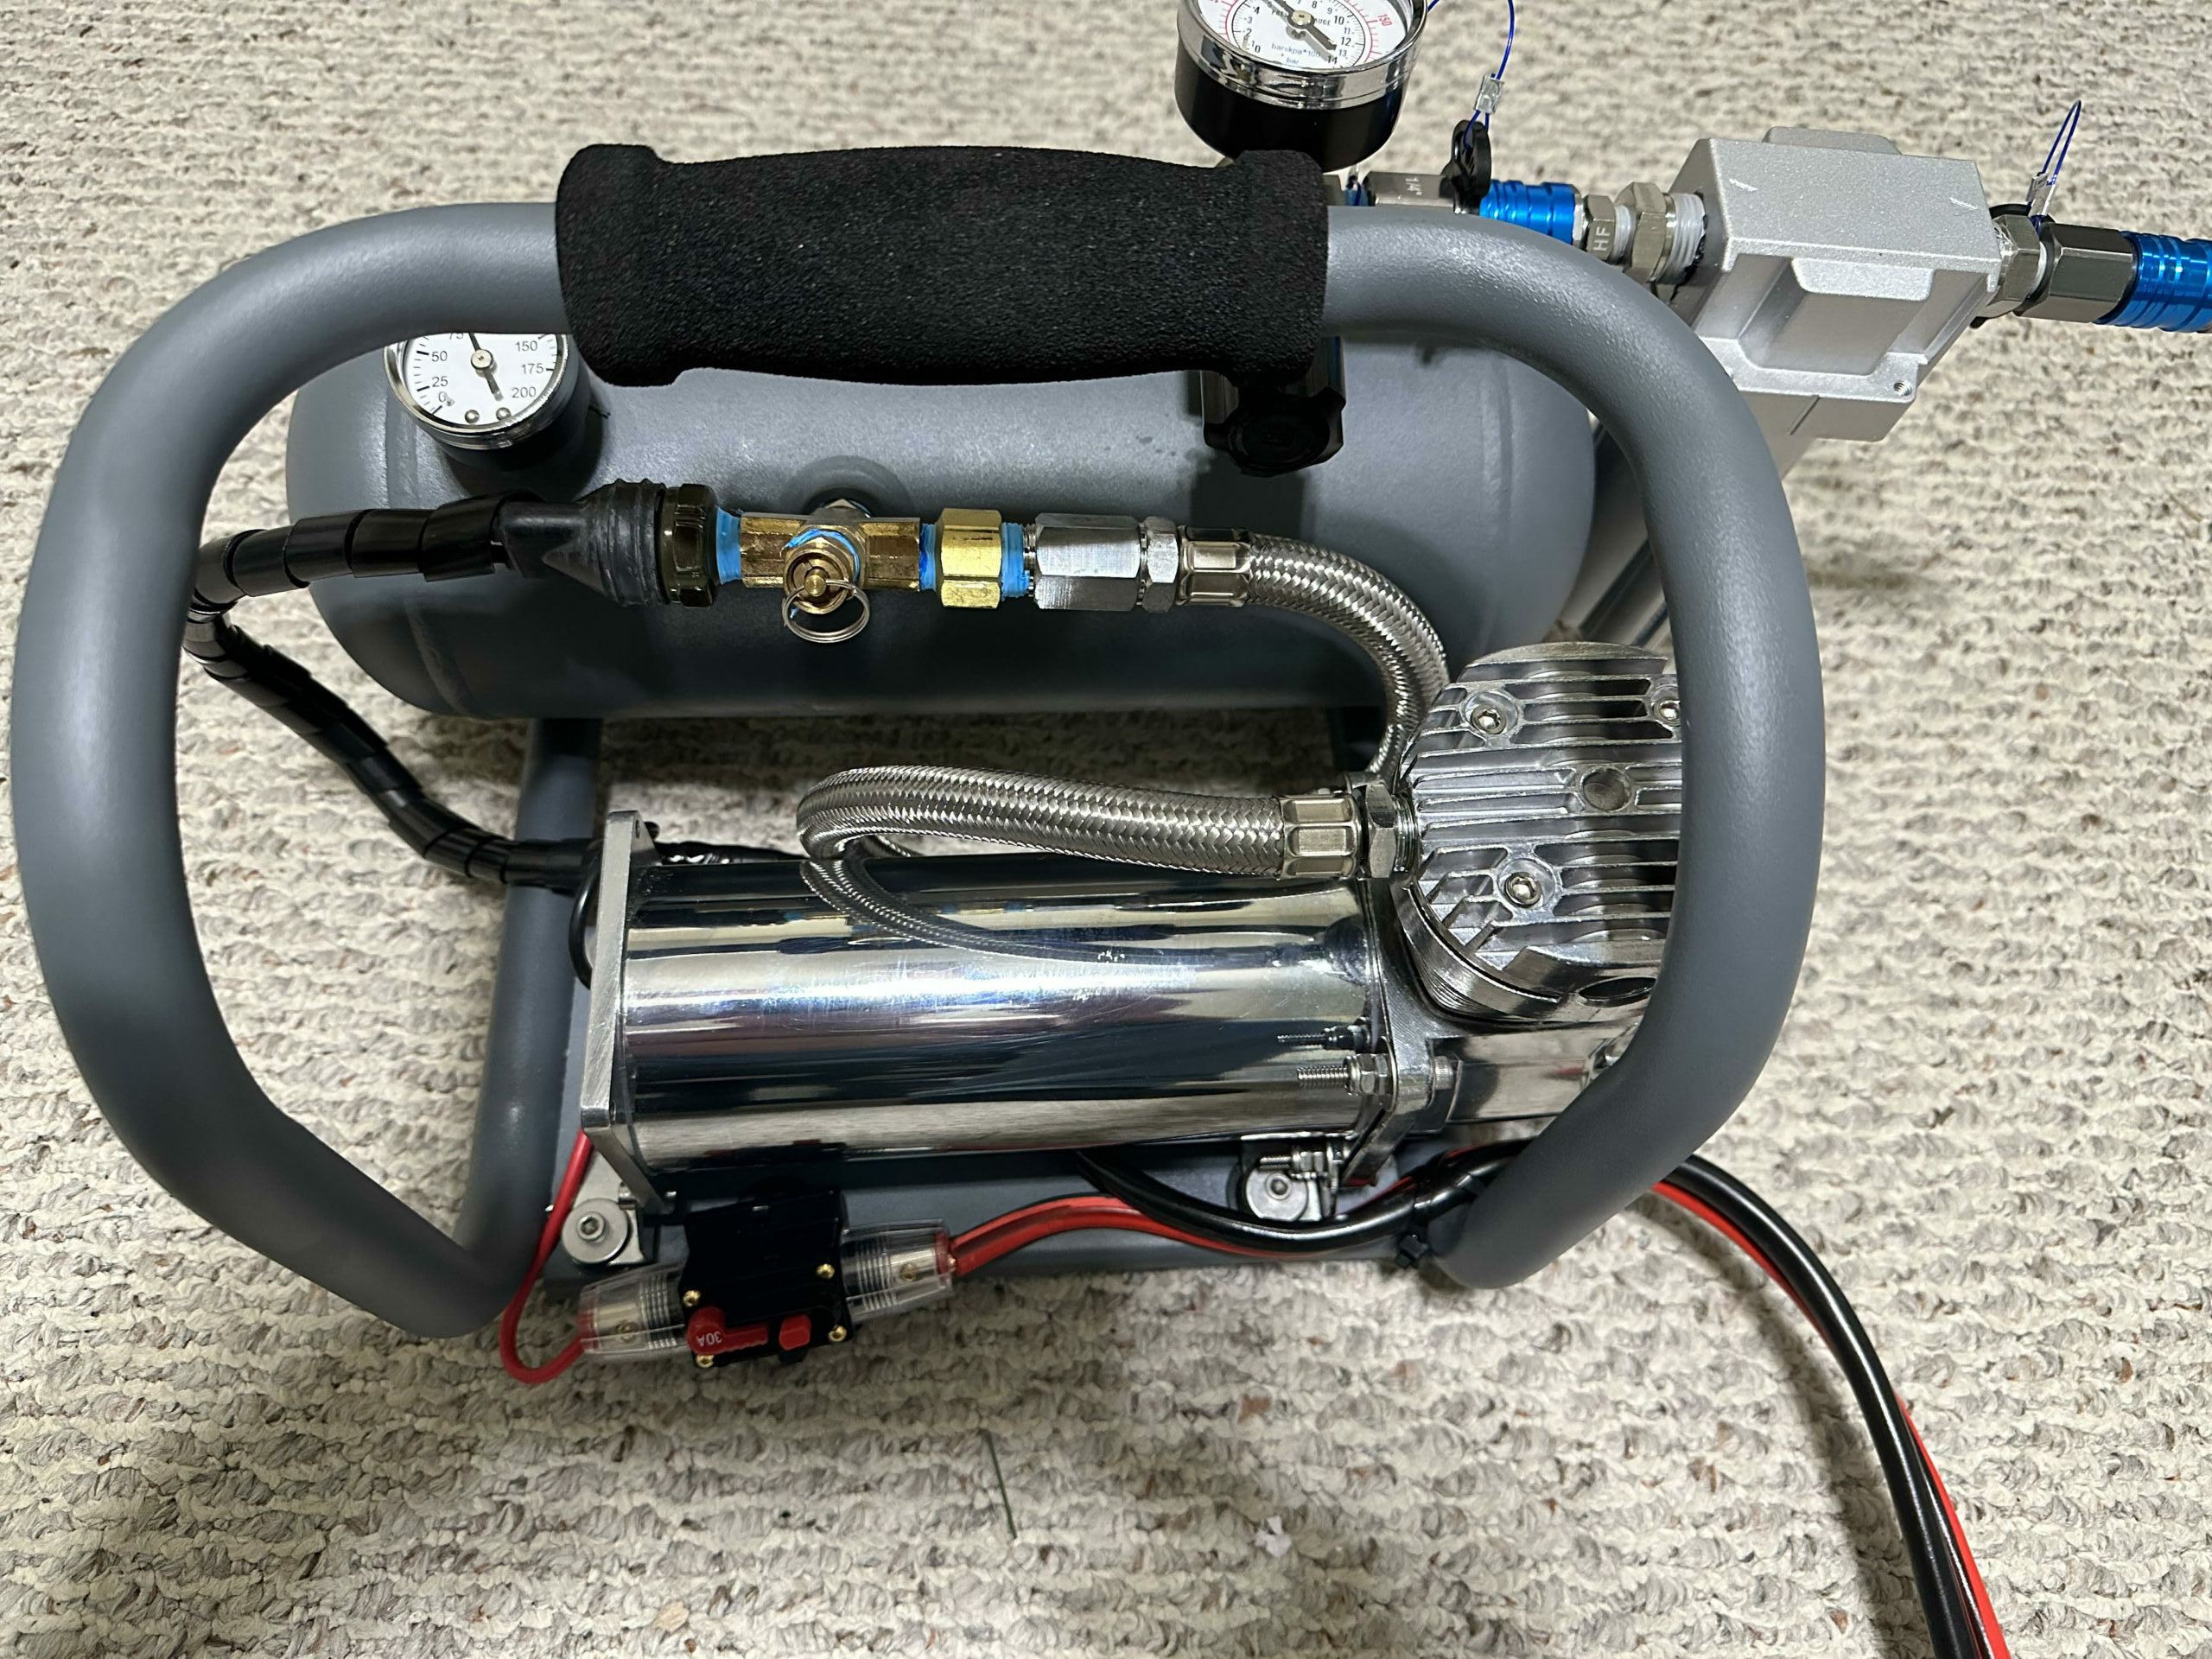 Close-up of a portable air compressor with gauges and hoses on a textured surface.